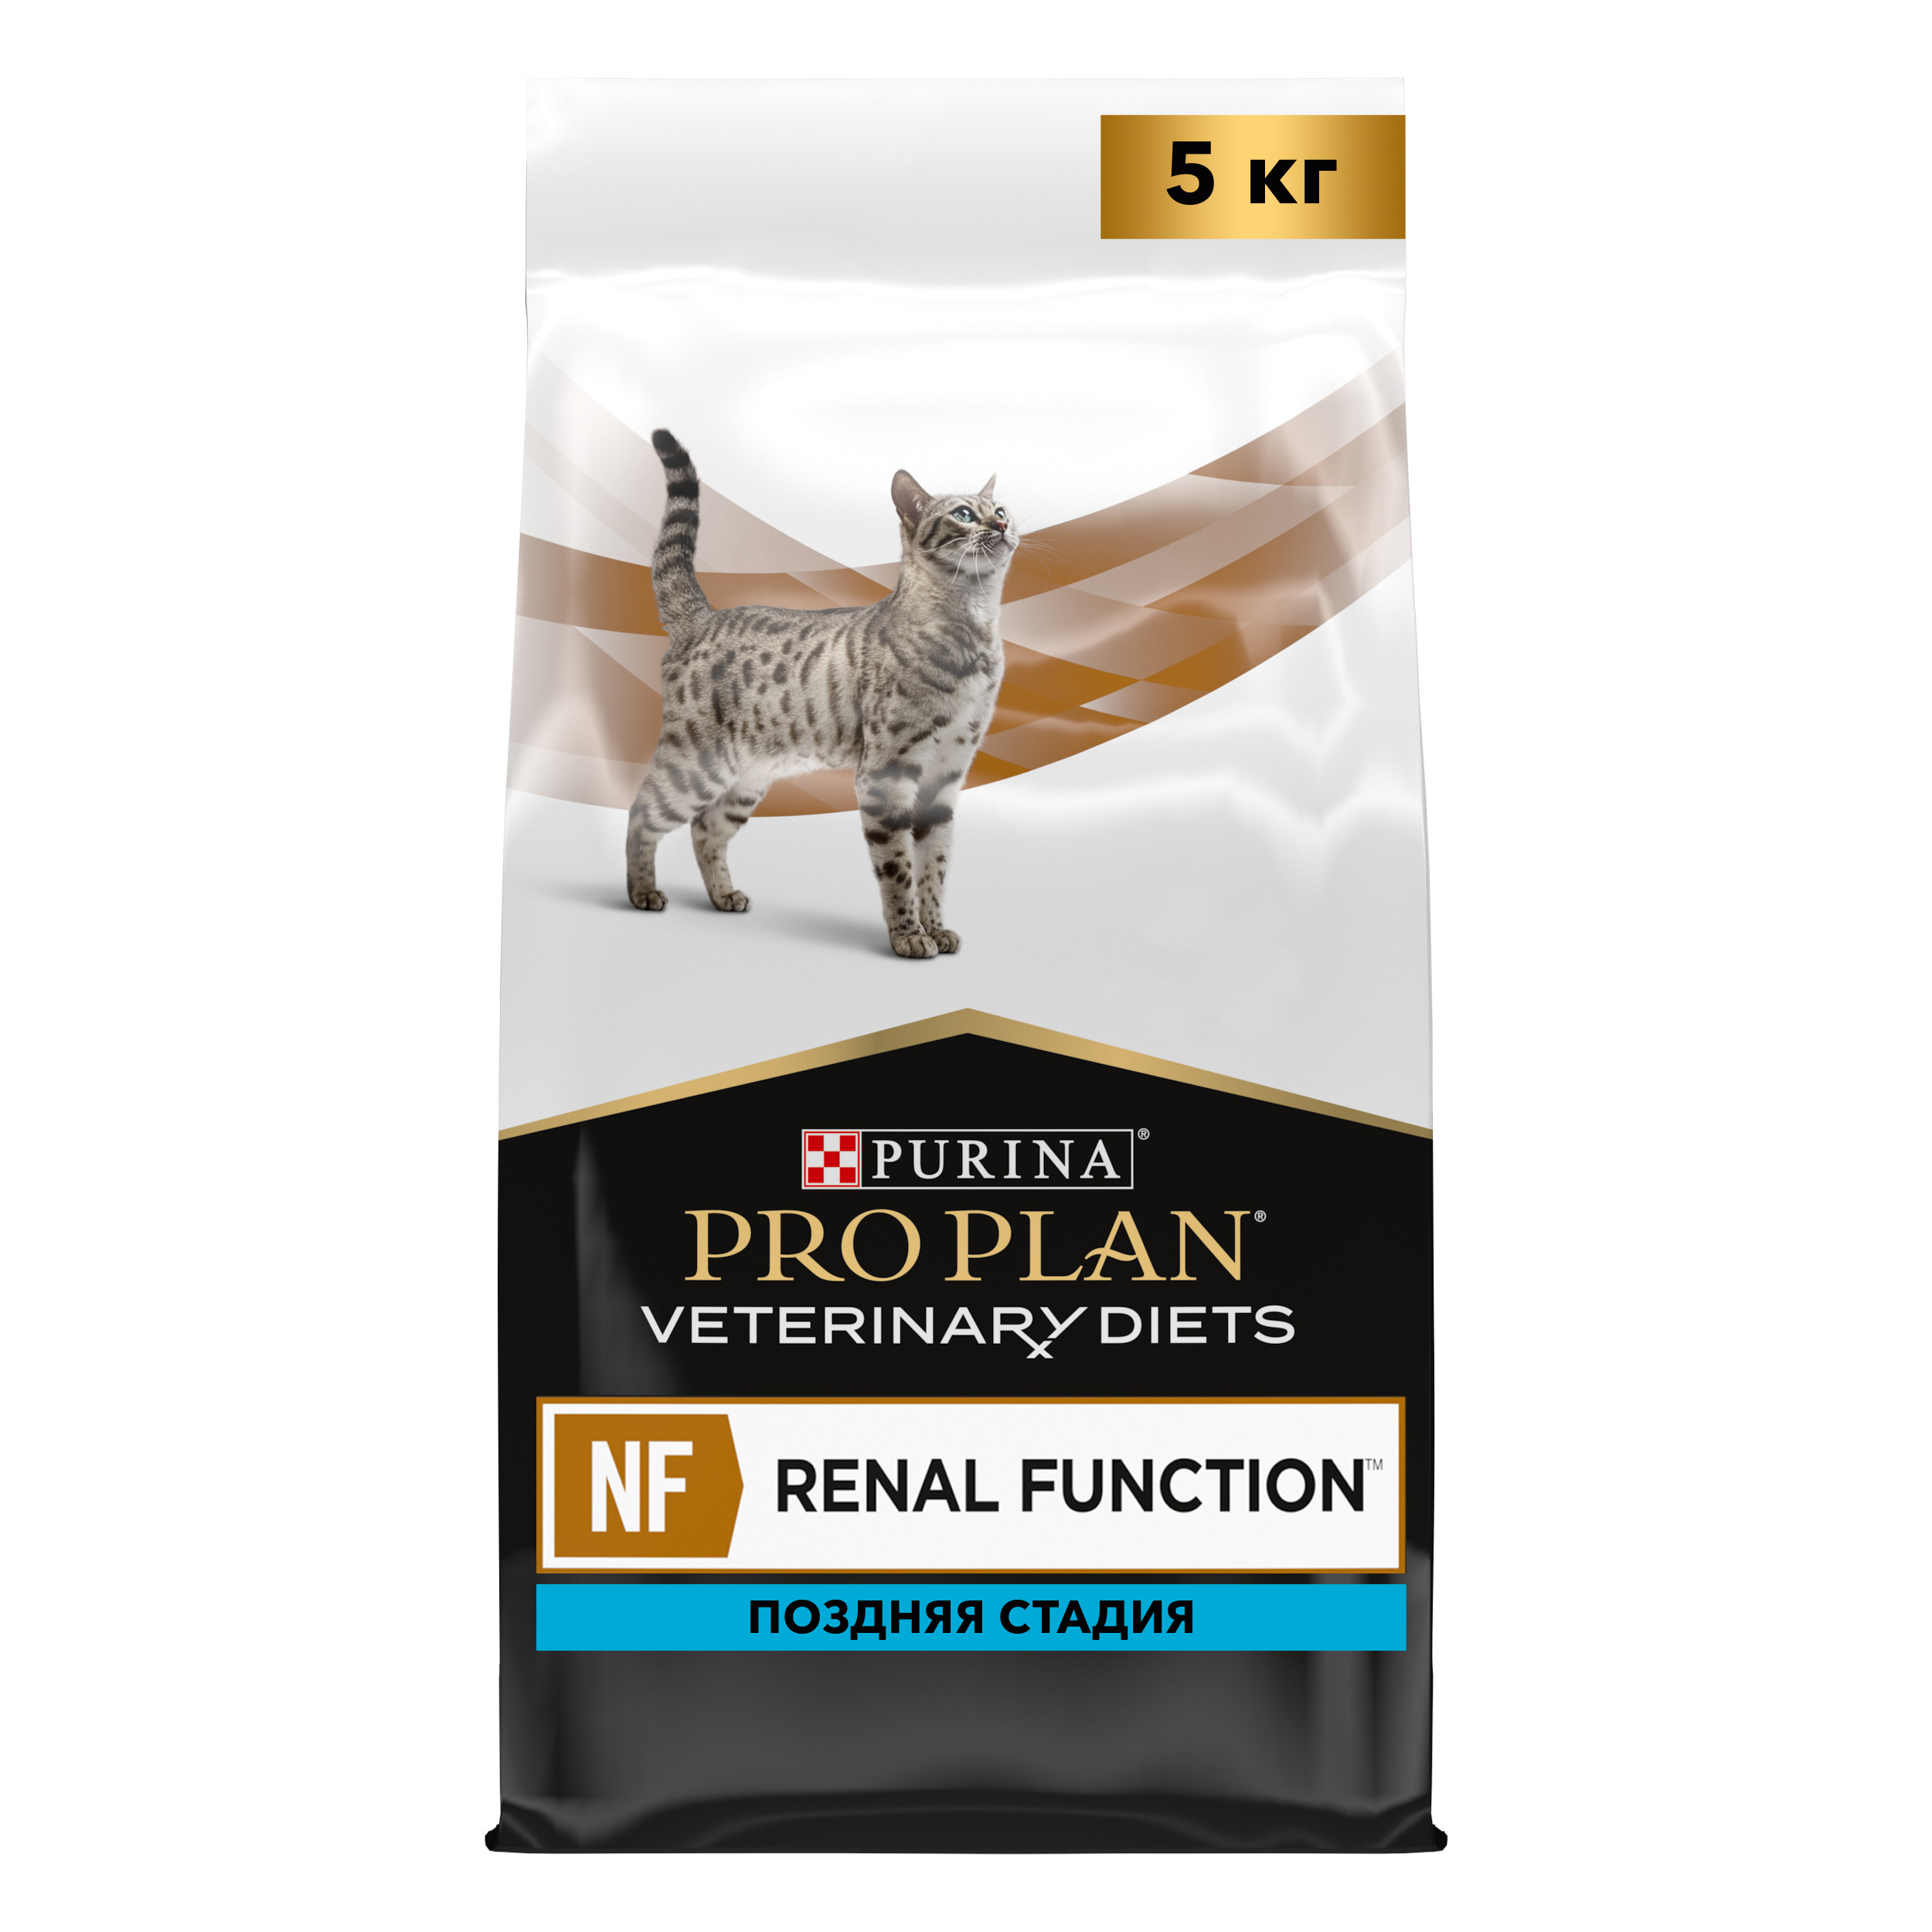 Pro plan nf renal function advanced care. Purina Pro Plan Veterinary Diets NF. Purina Pro Plan renal function Advanced Care. Ренал НФ корм для кошек. Purina Pro Plan Veterinary Diets renal function для кошек.